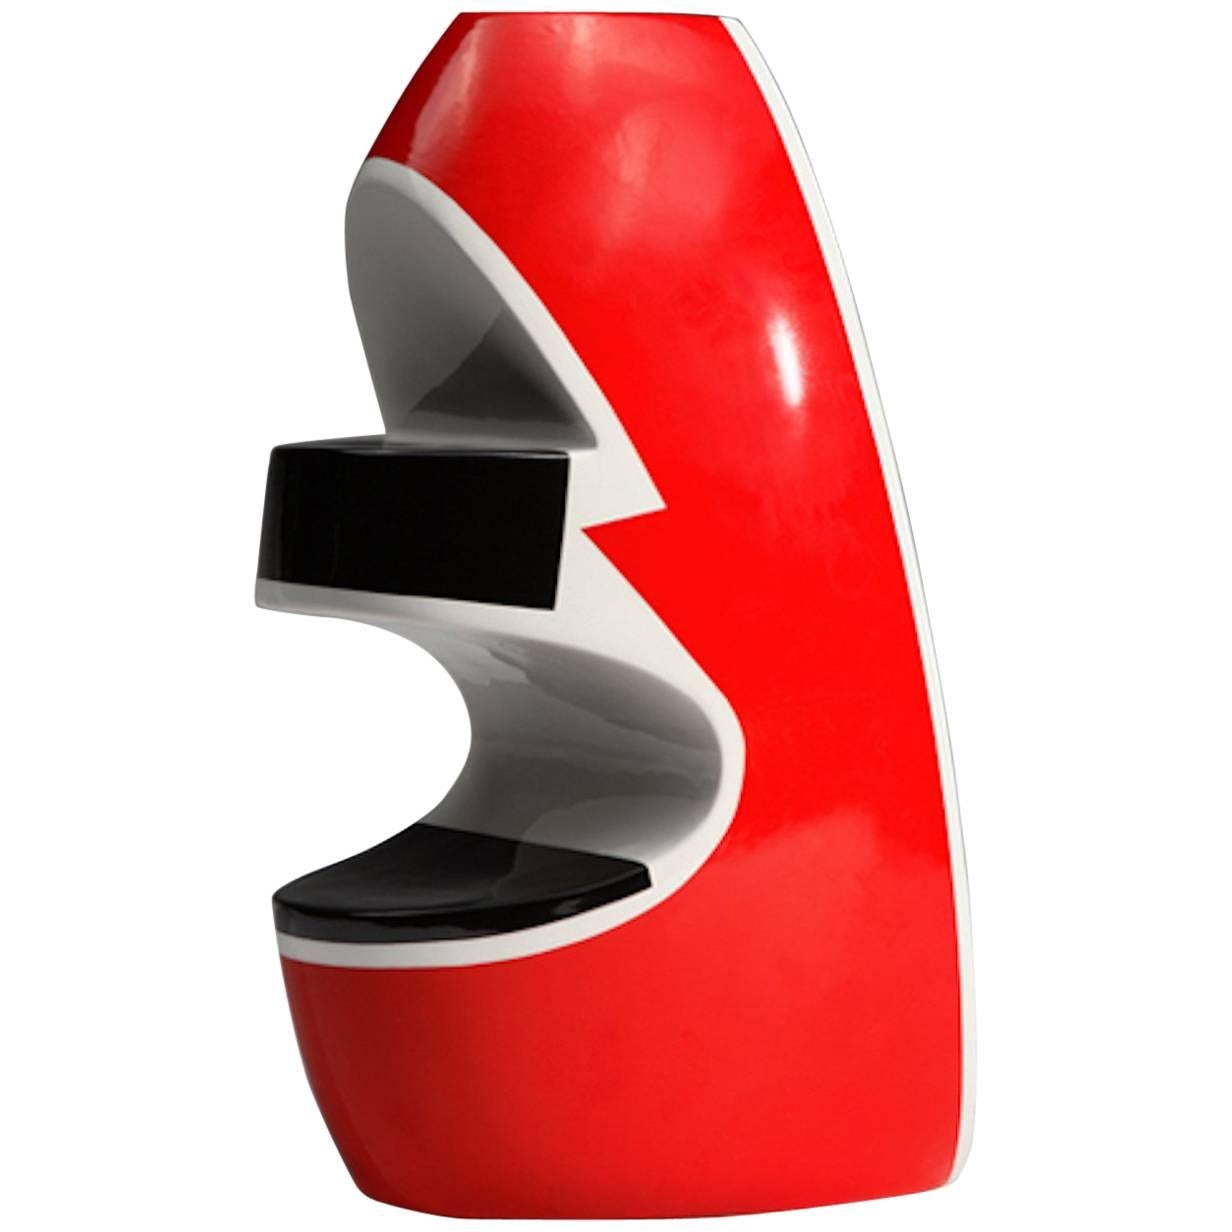 Italian Ceramic Vase Red Model by George Sowden for Superego Editions. For Sale